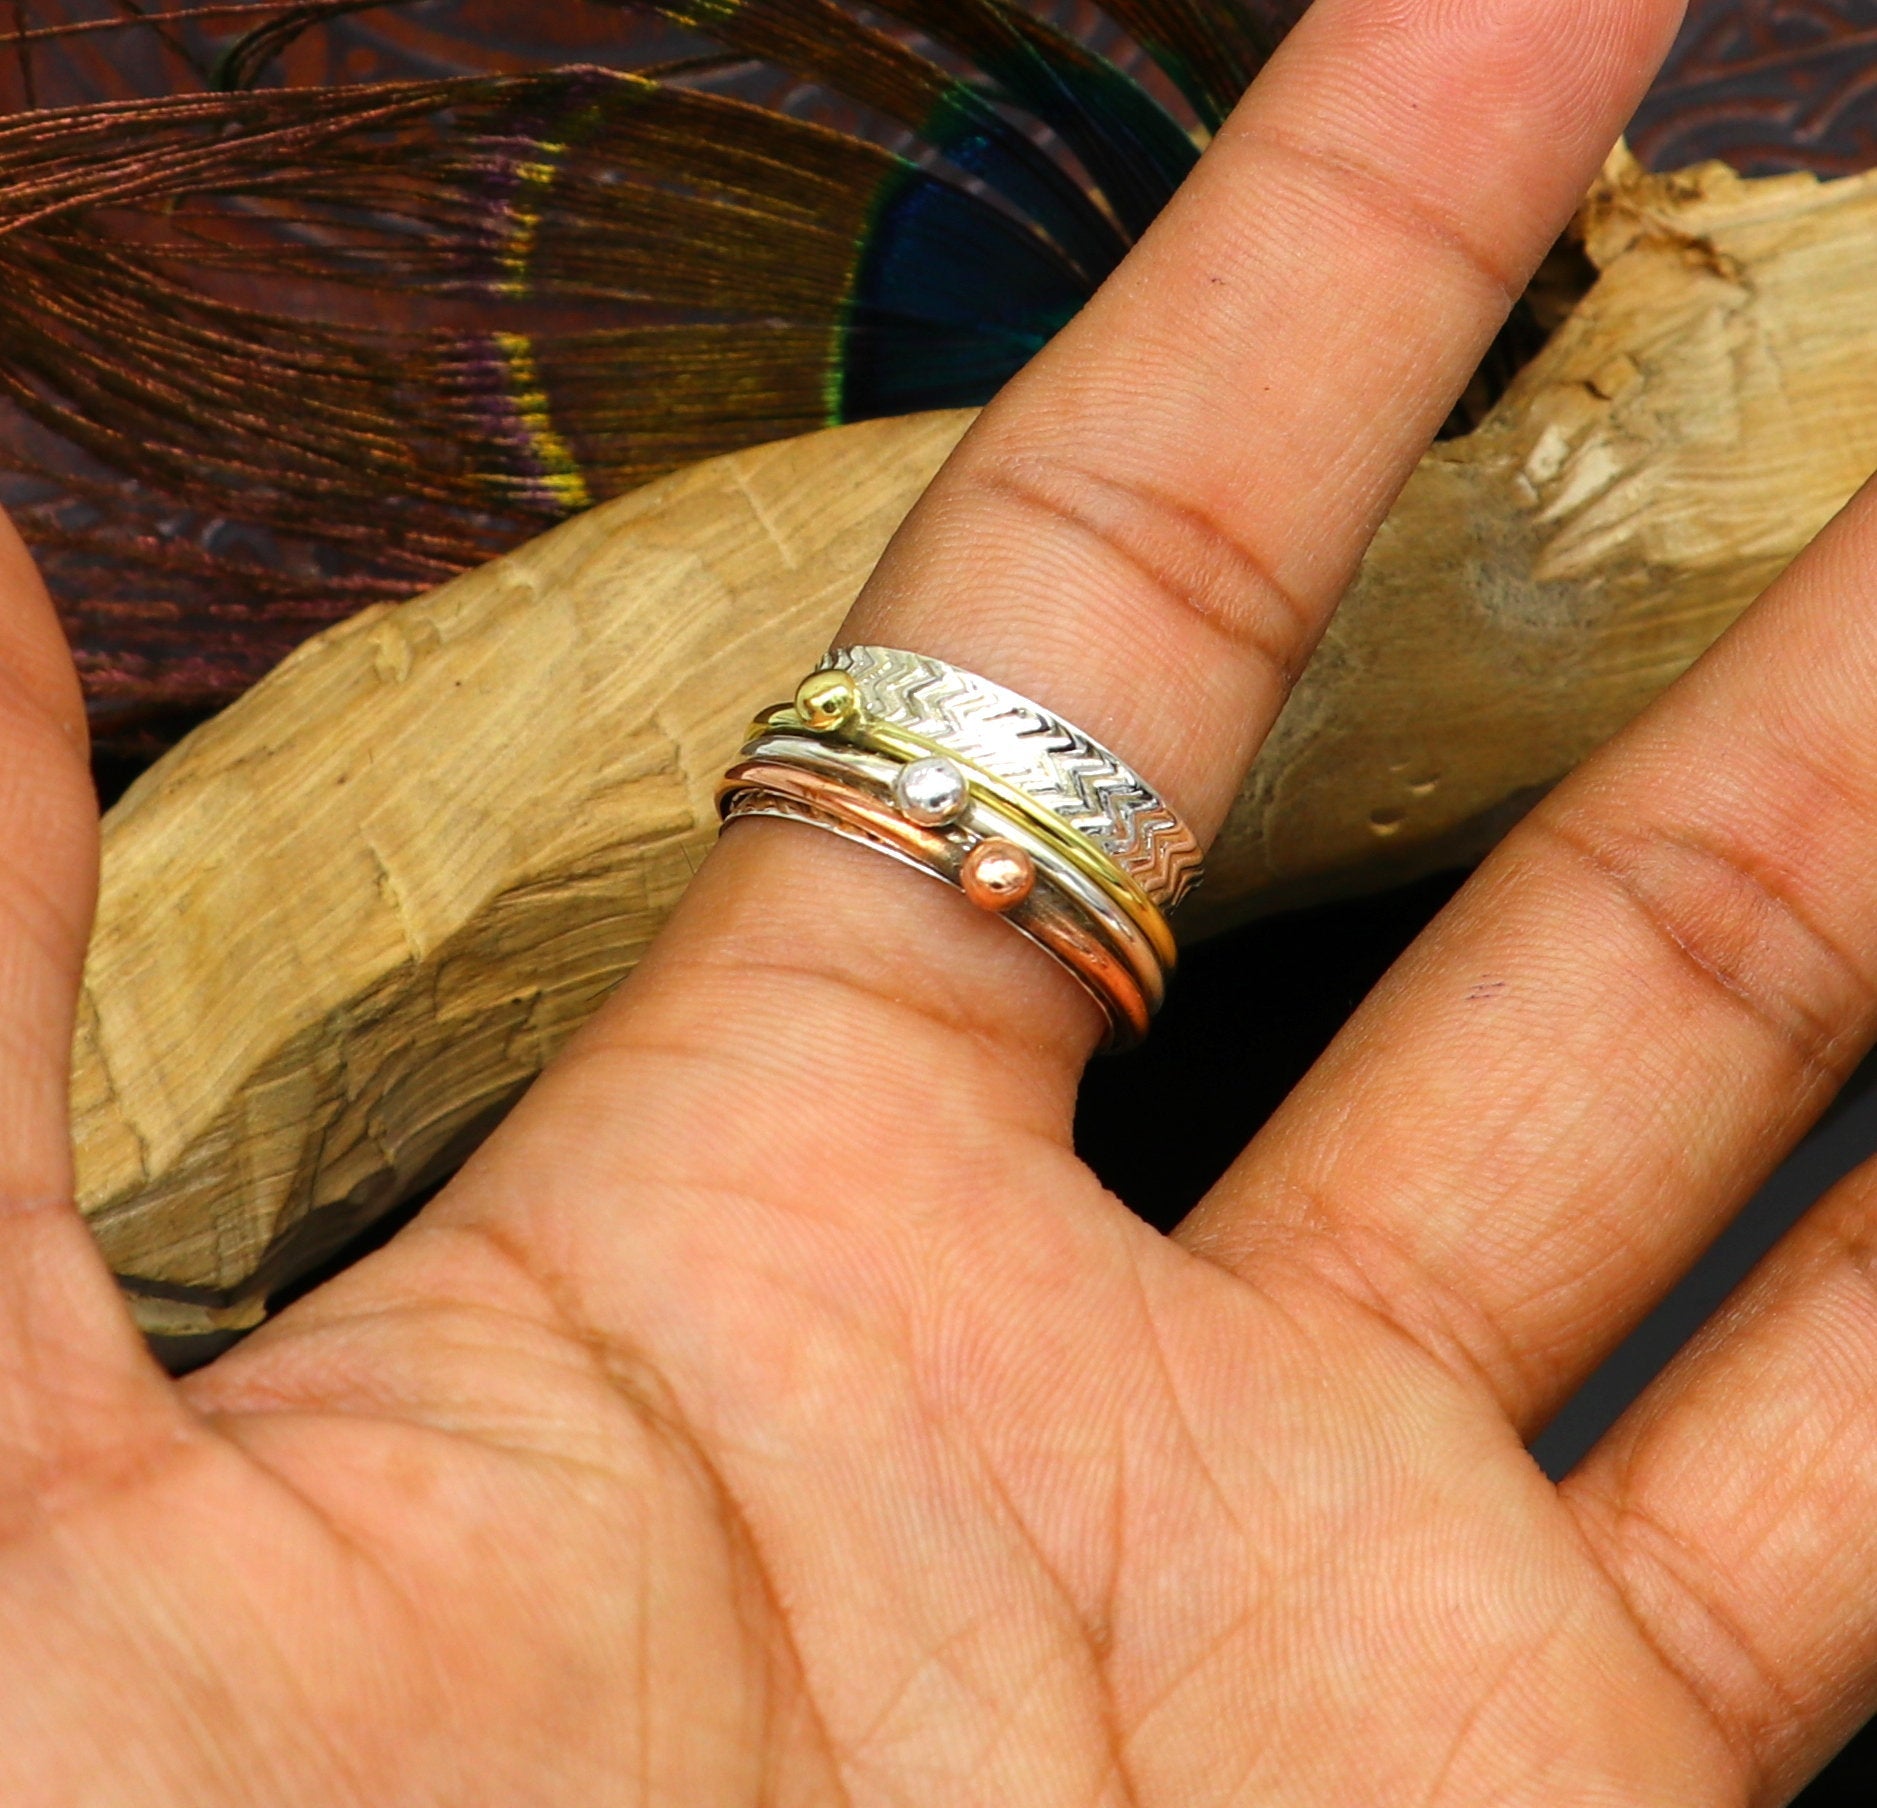 14K GOLD TEXTURED SUMMERTIME DOLPHIN THUMB RING – Jewelry and The Sea